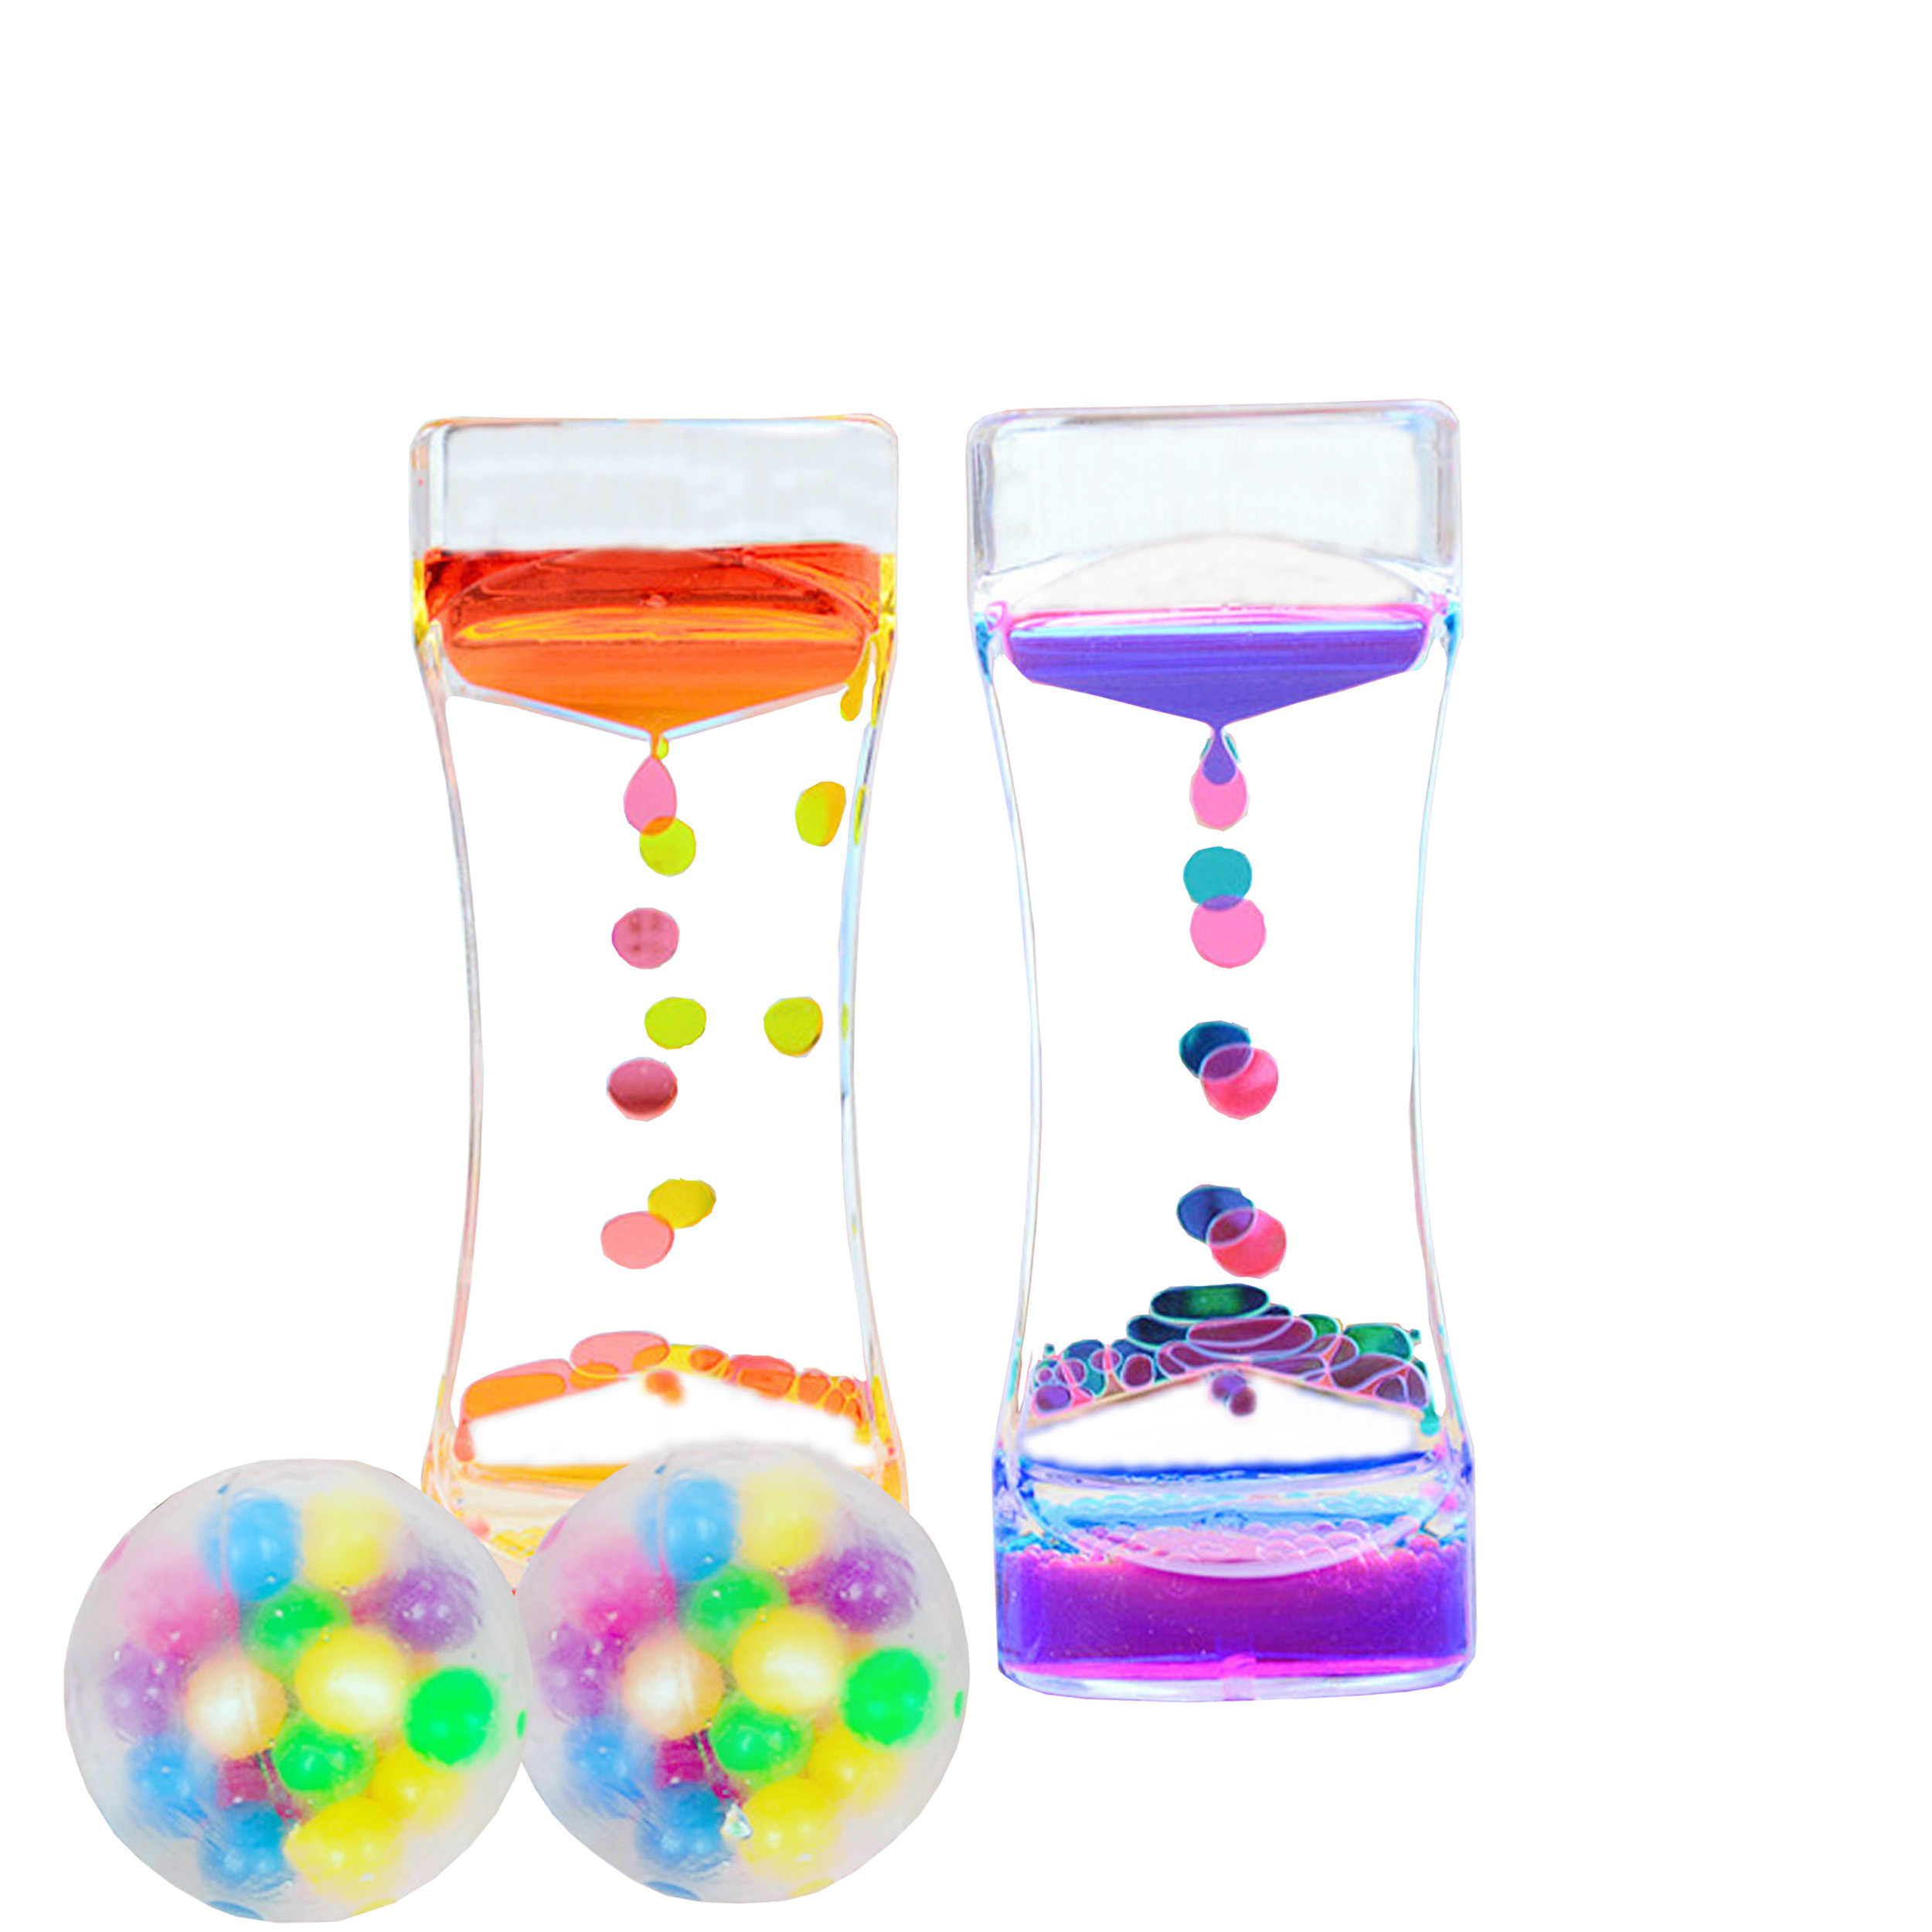 FixtureDisplays TOYS Sensory Toy Package-Ideal Gifts for Children with Autism-Sensory Toys for Autistic Children-Squeeze Balls and Liquid Motion